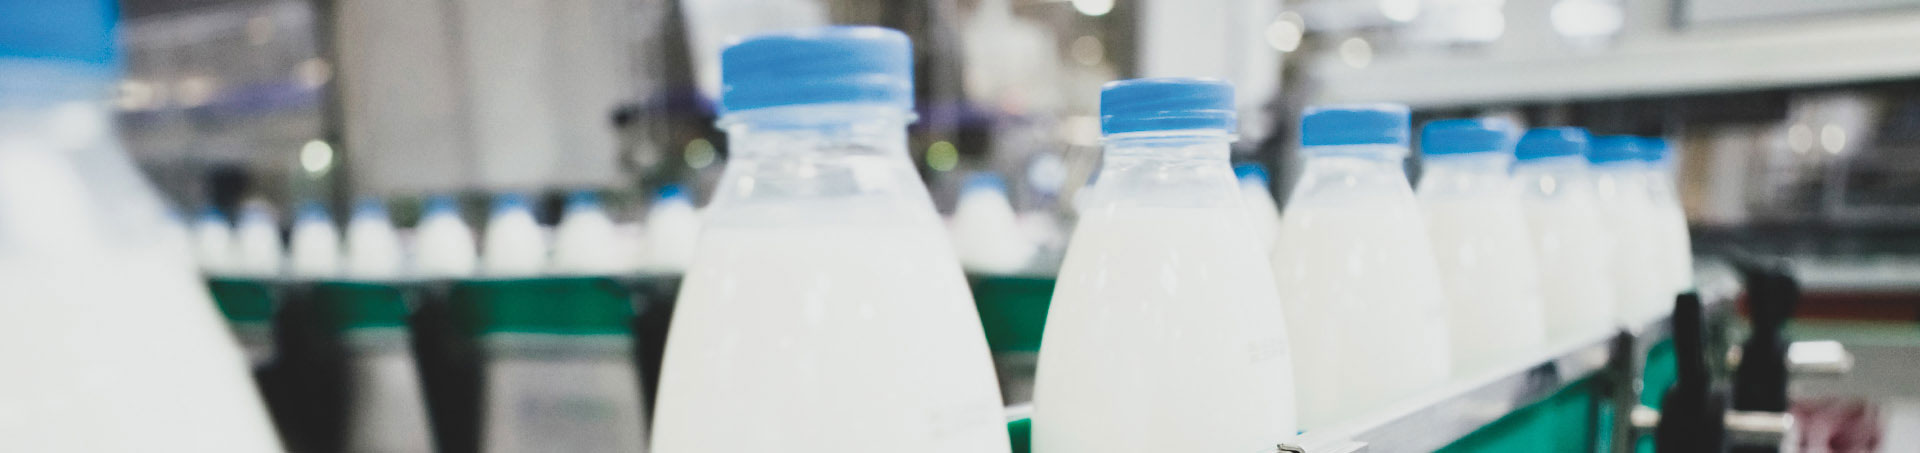 AQ Dairy Manufacturing Industry